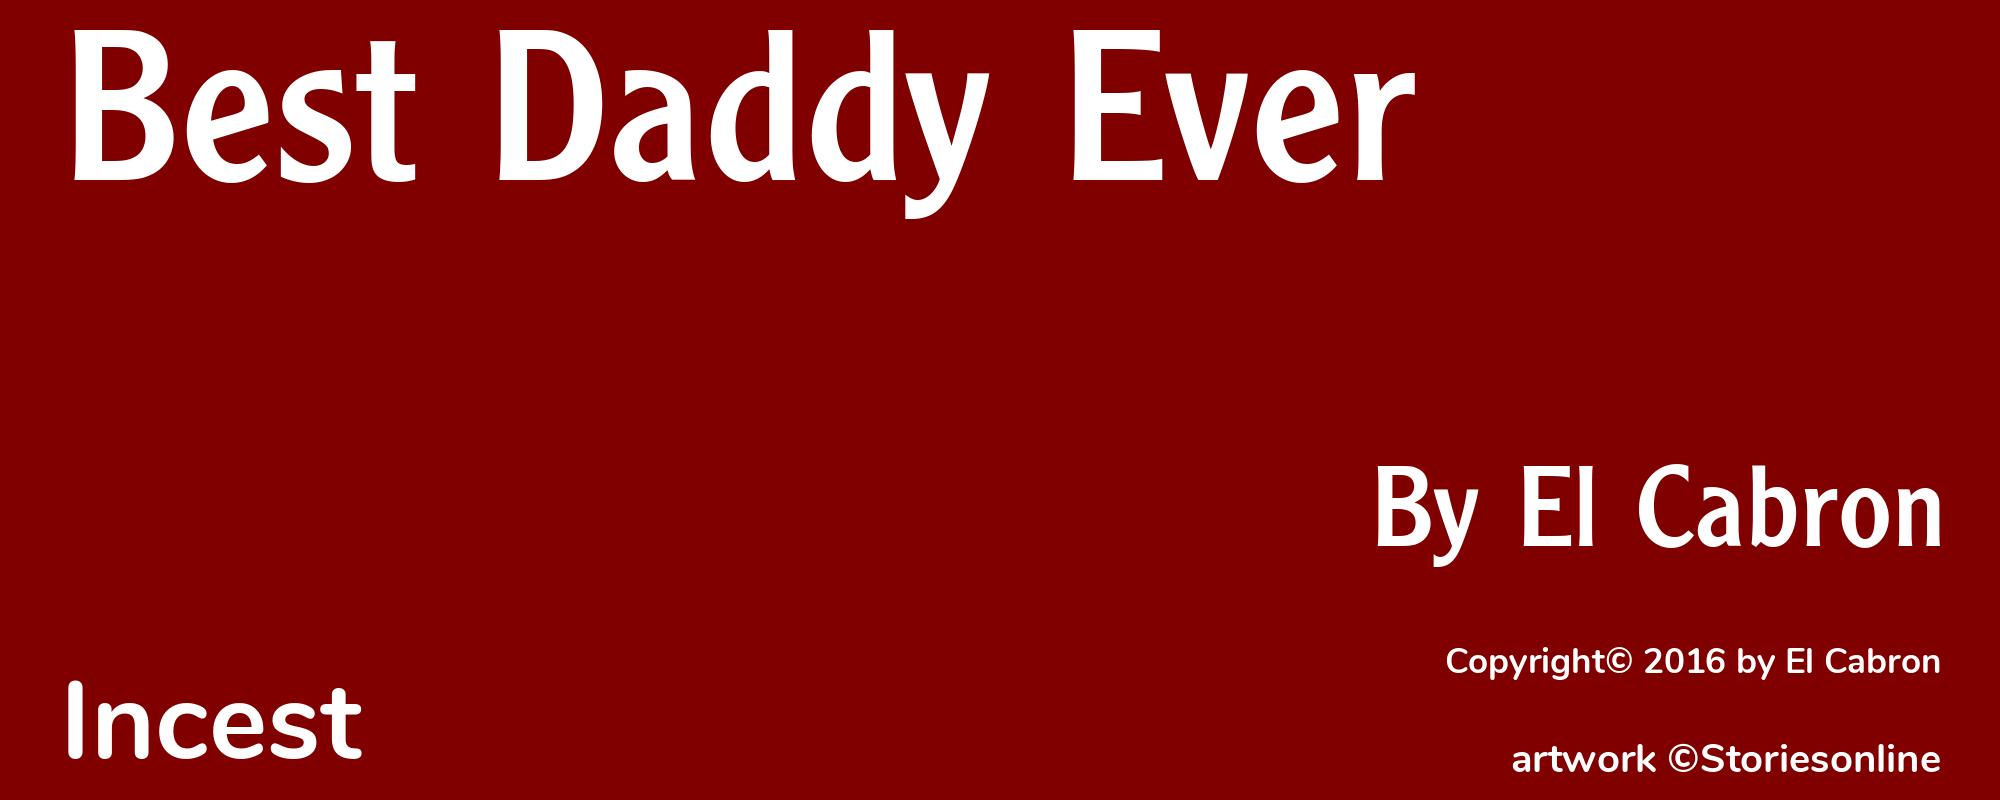 Best Daddy Ever - Cover